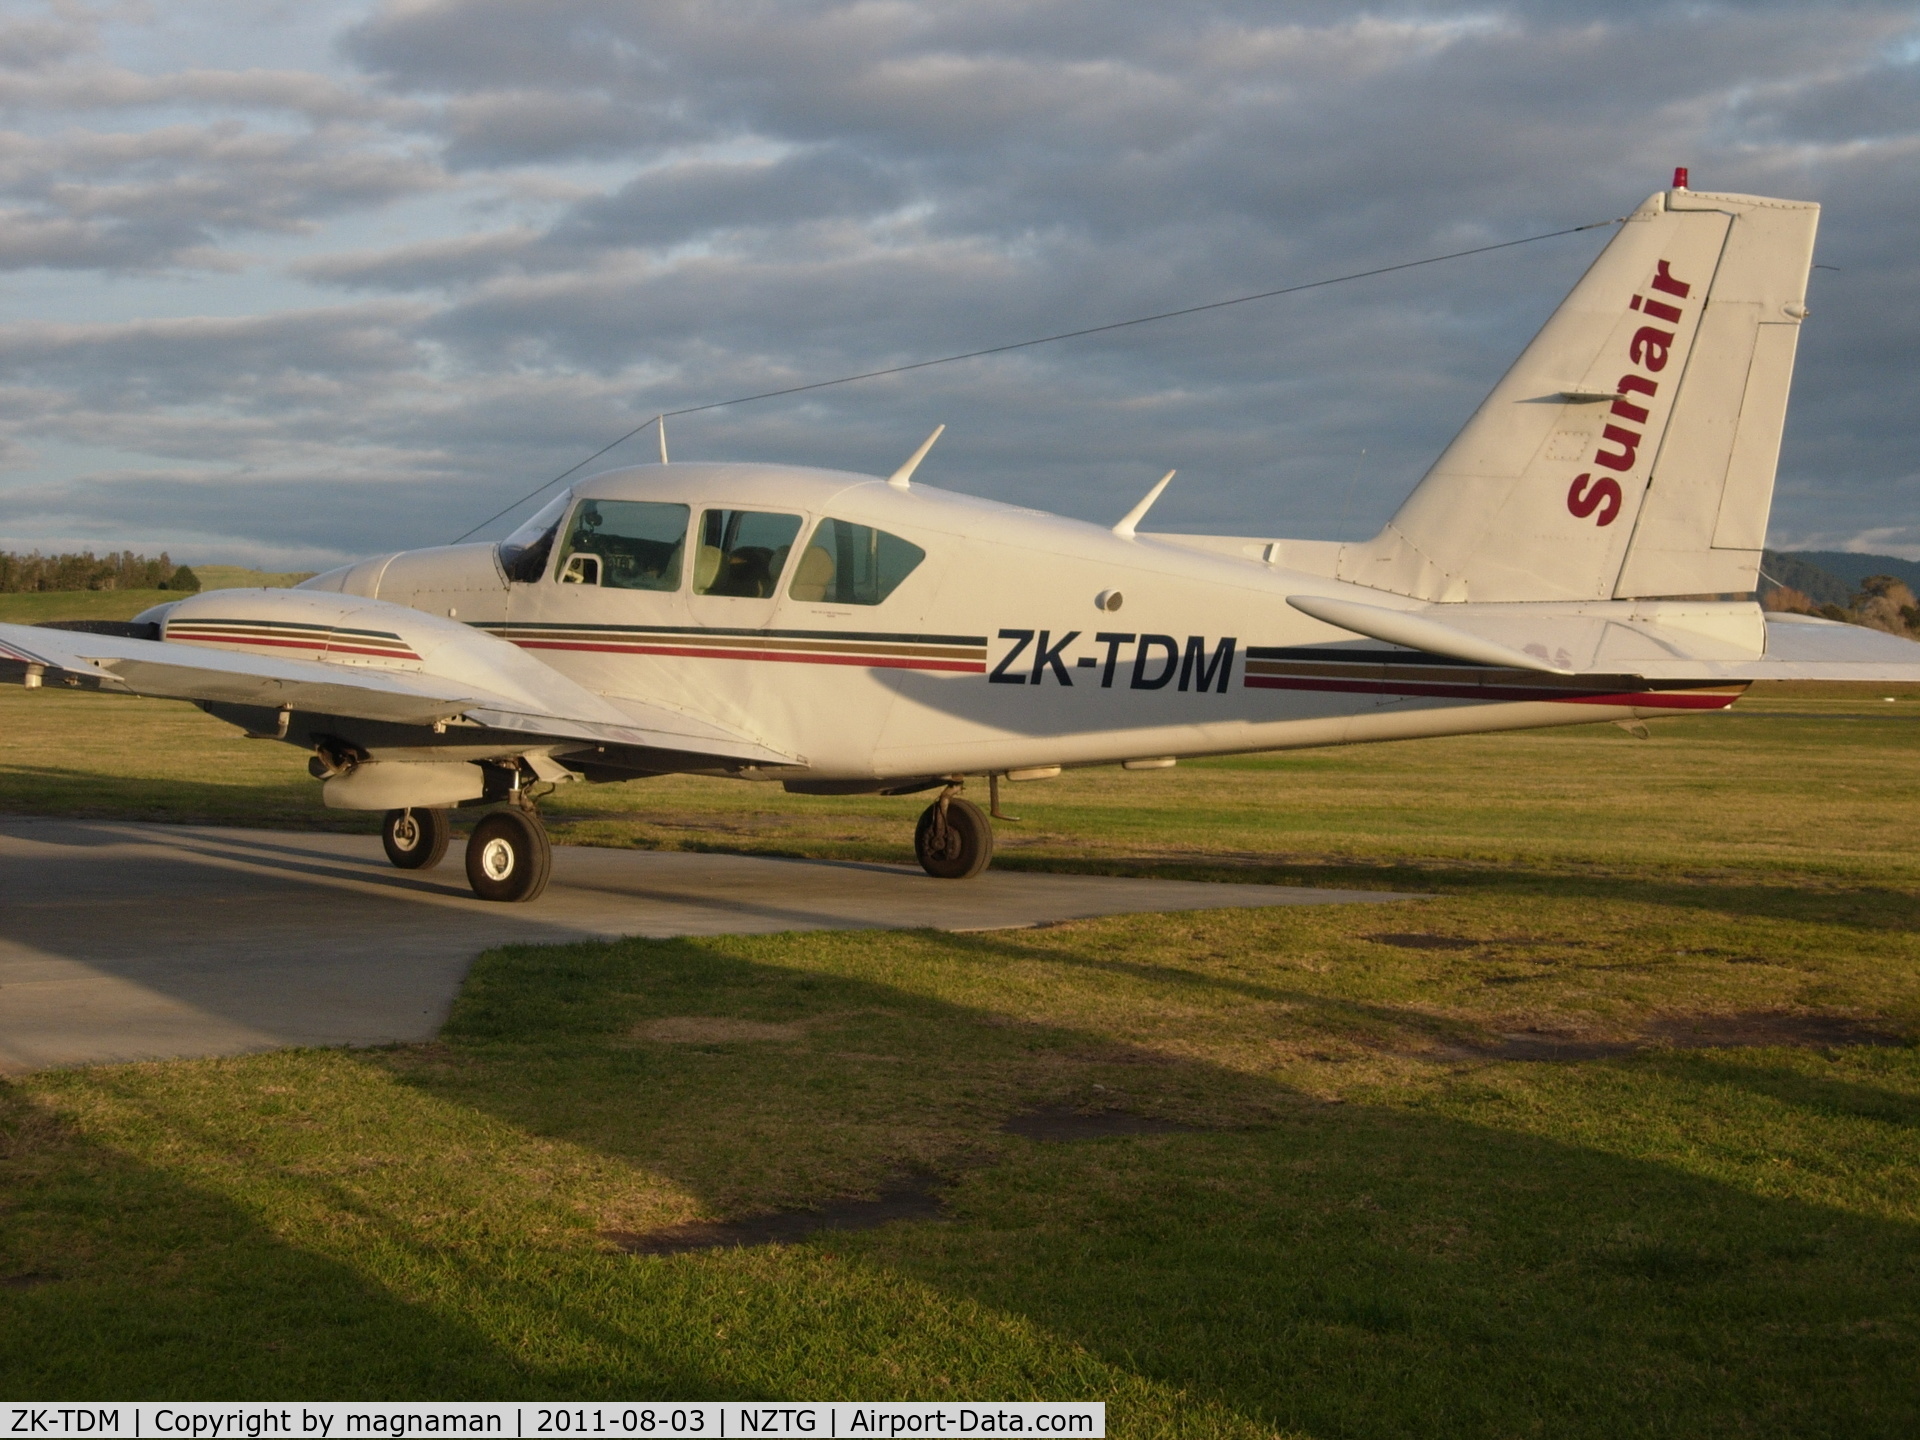 ZK-TDM, Piper PA-23-250 C/N 27-7754045, Sunair in the sunset